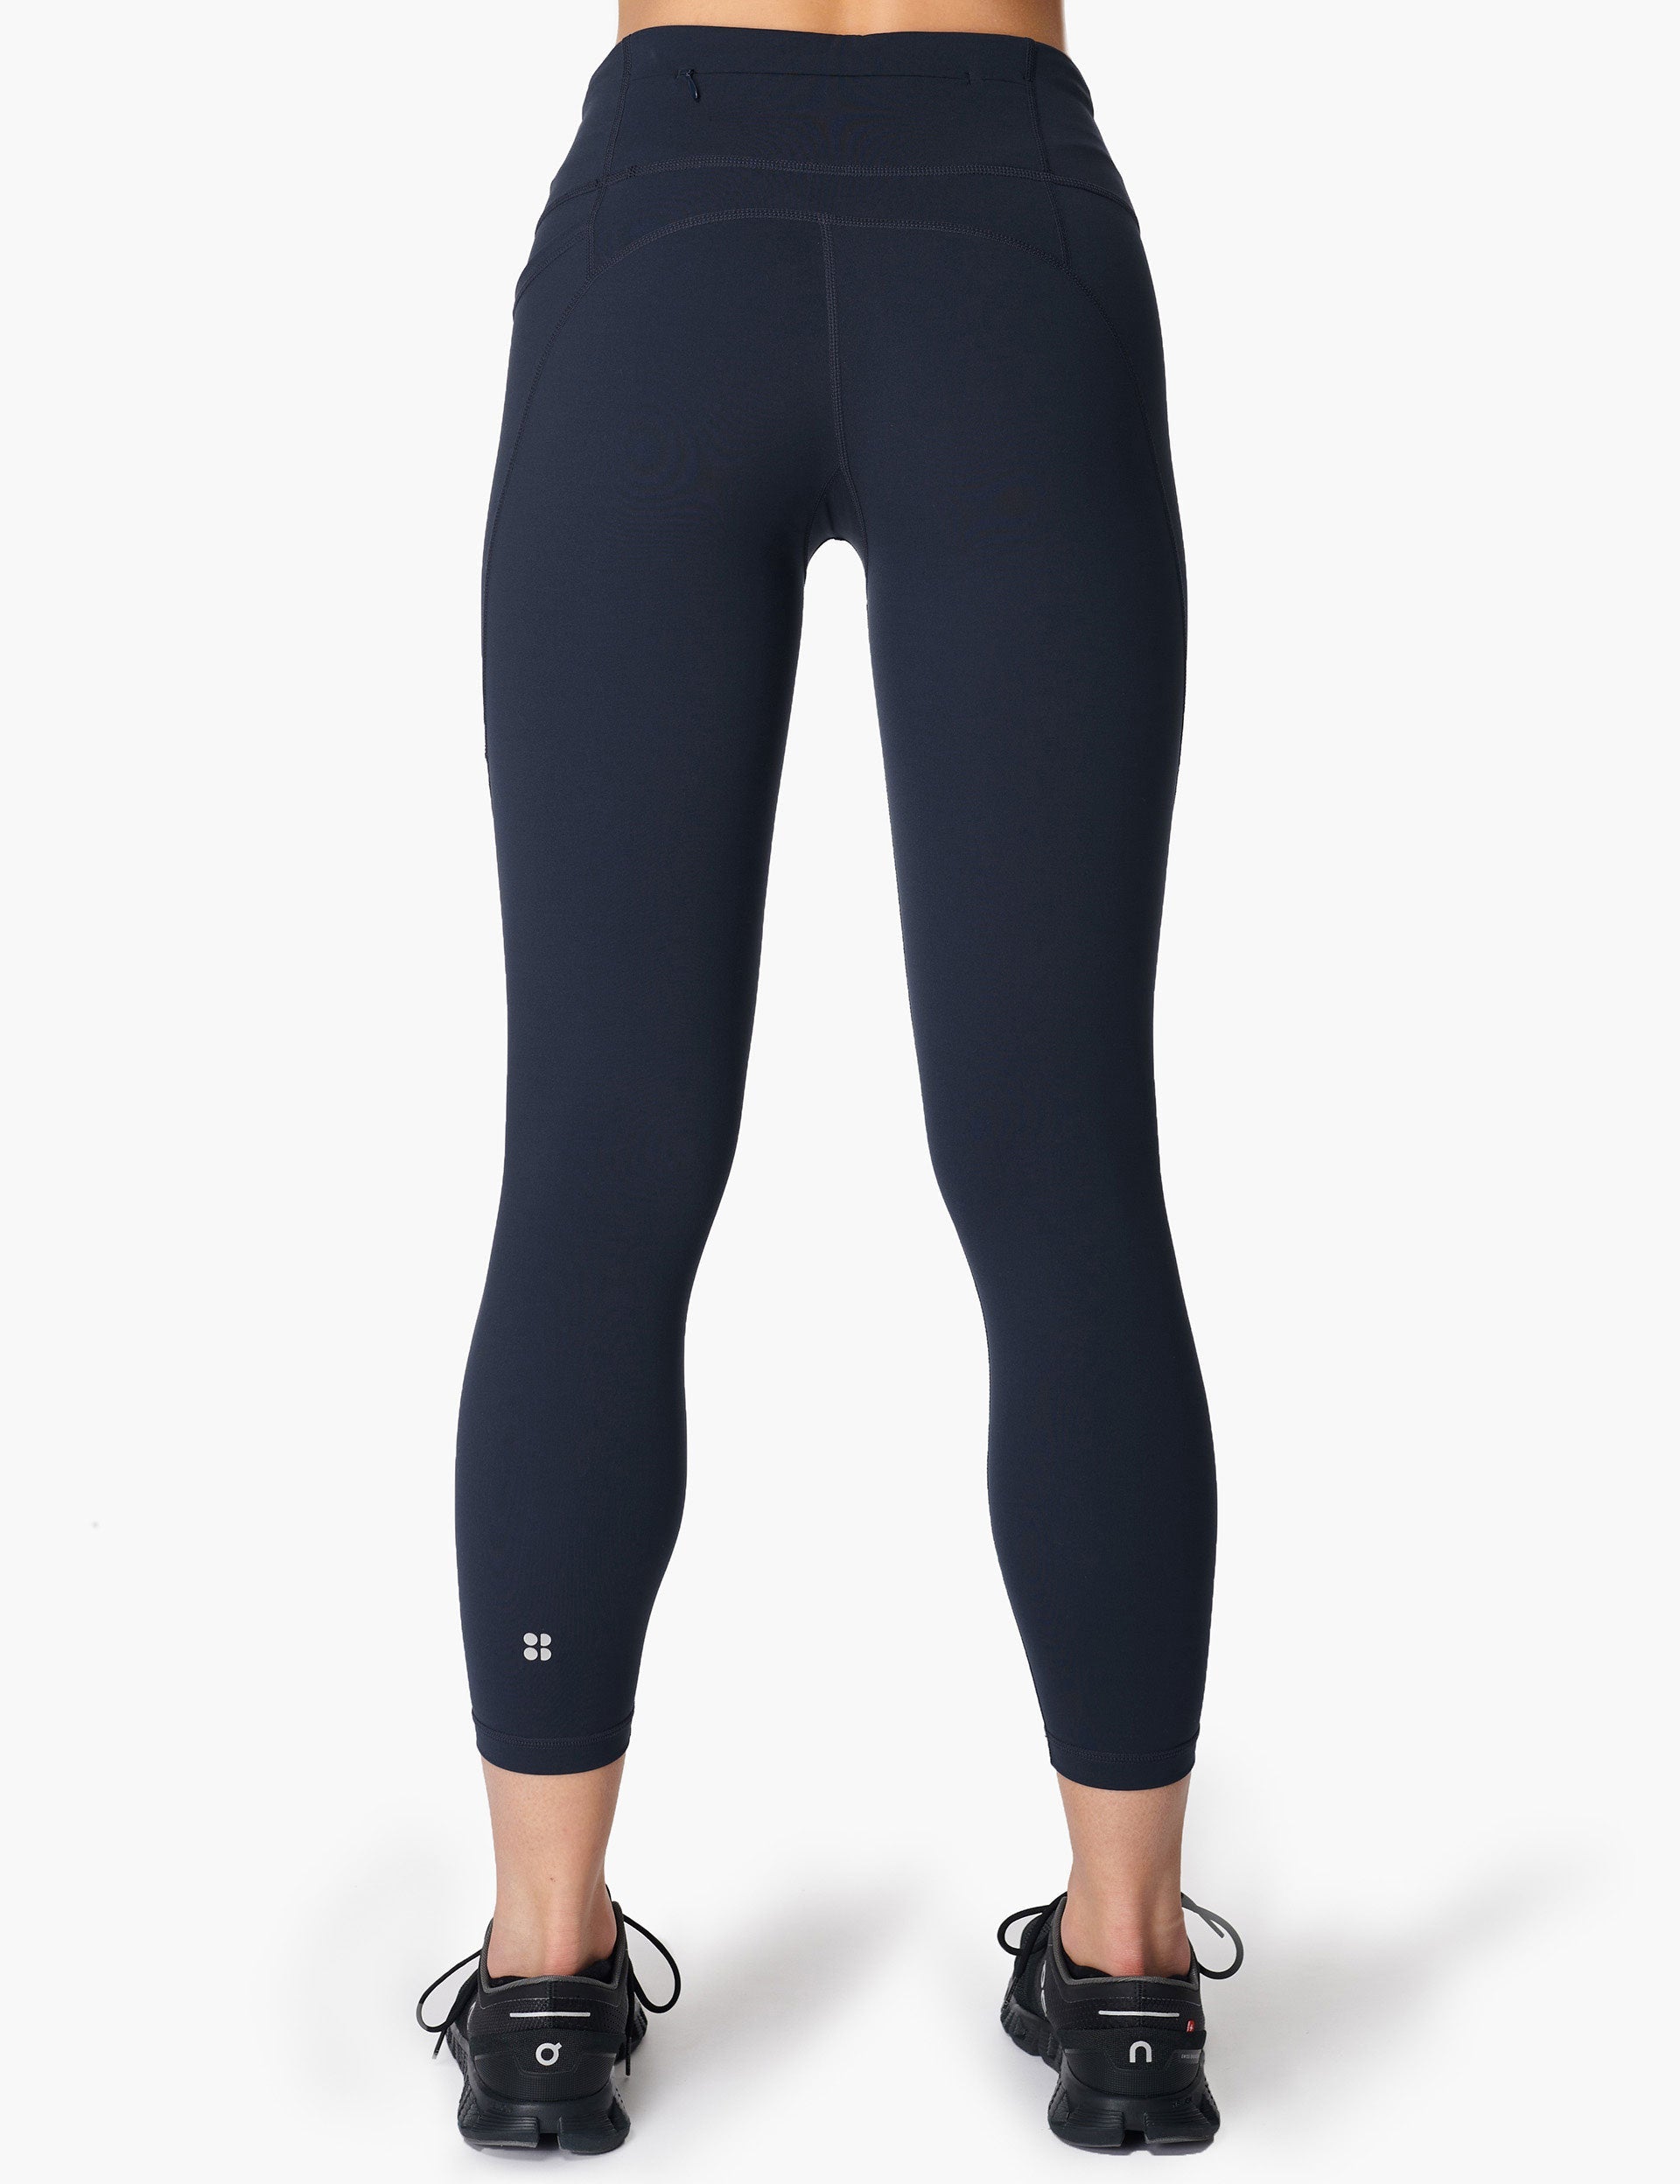 China Women Simple Blue Sports Leggings Price, Manufacturer - Factory  Direct Price - Angela Active